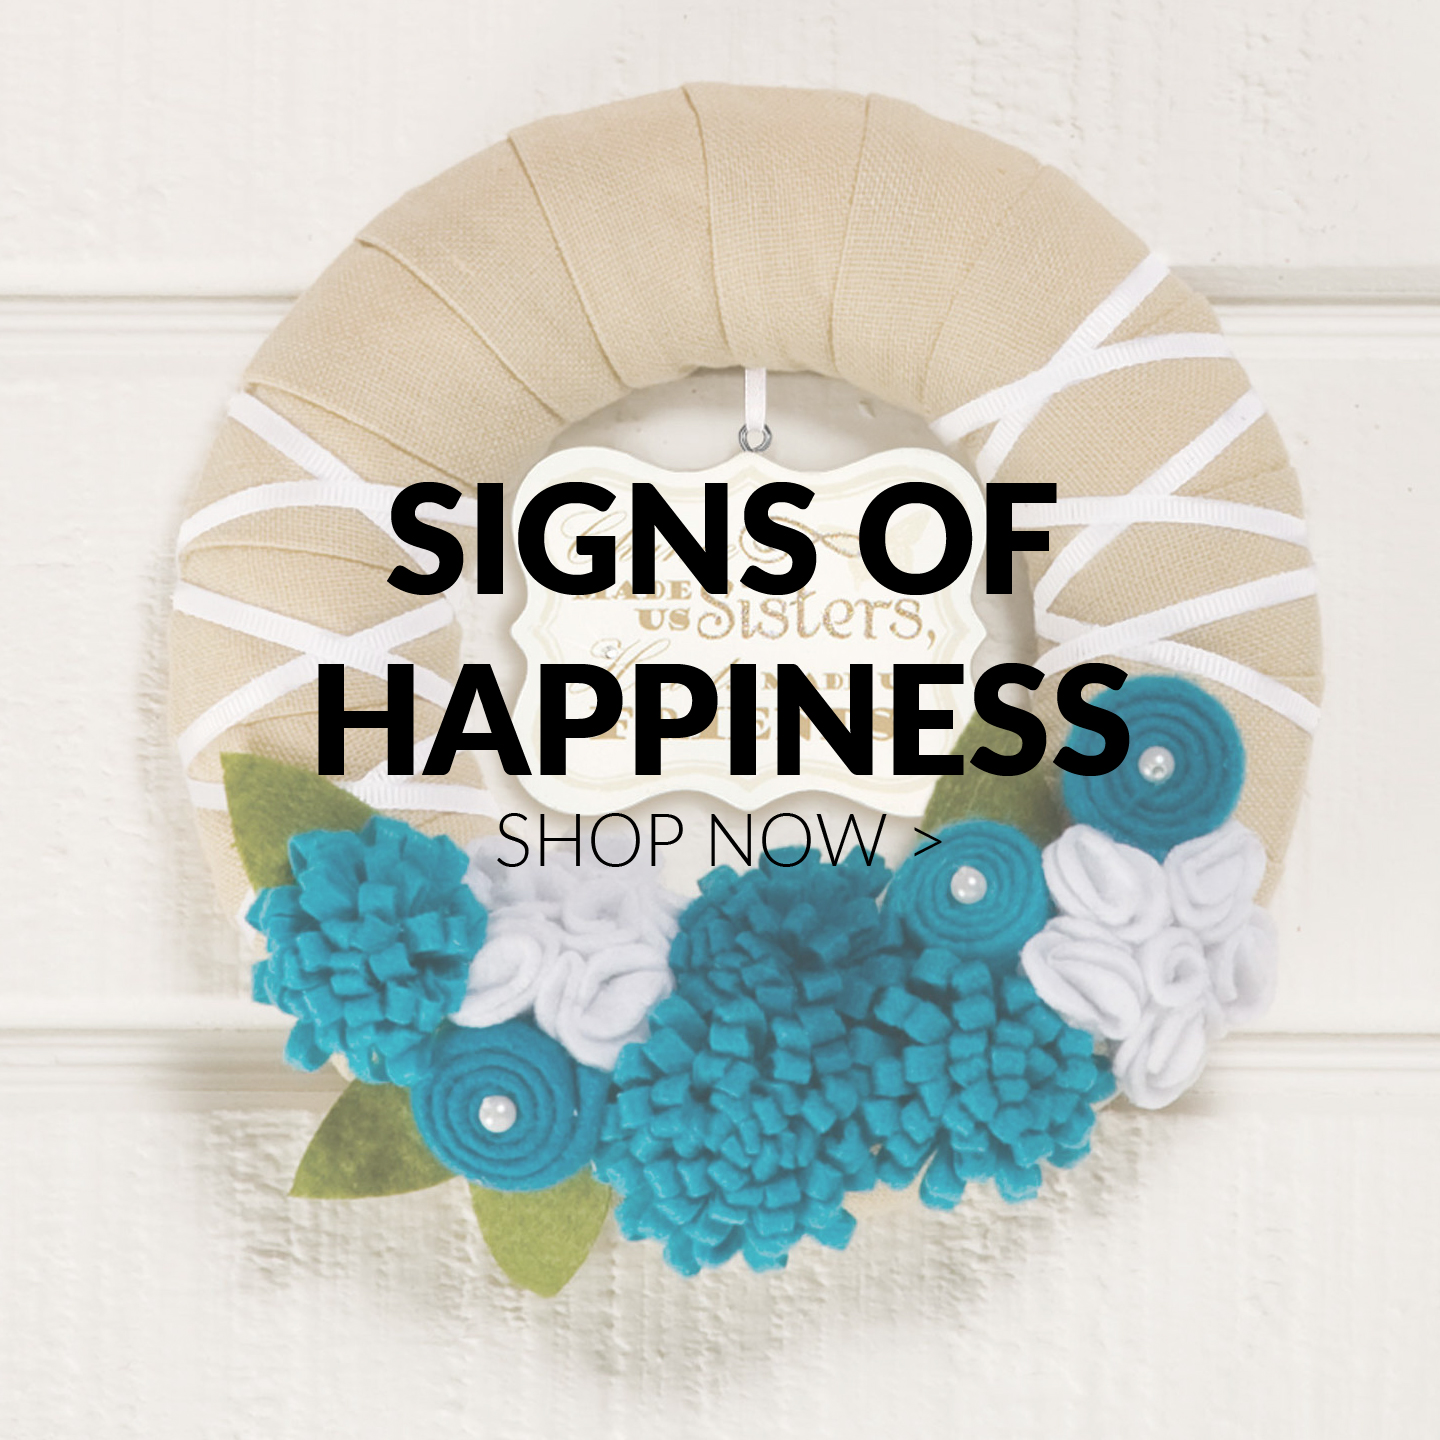 Signs of Happiness